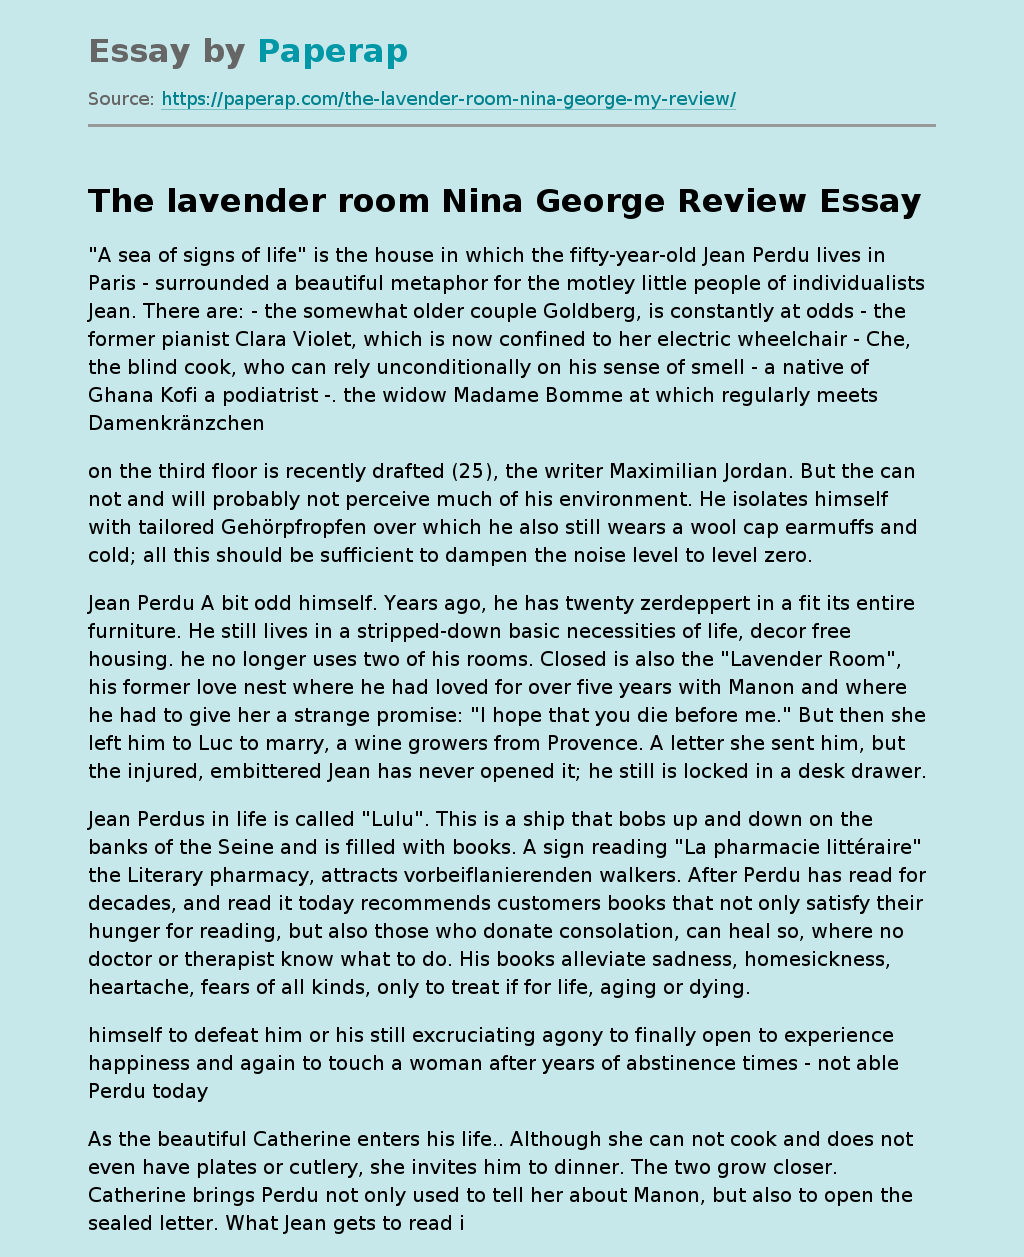 The lavender room Nina George Review